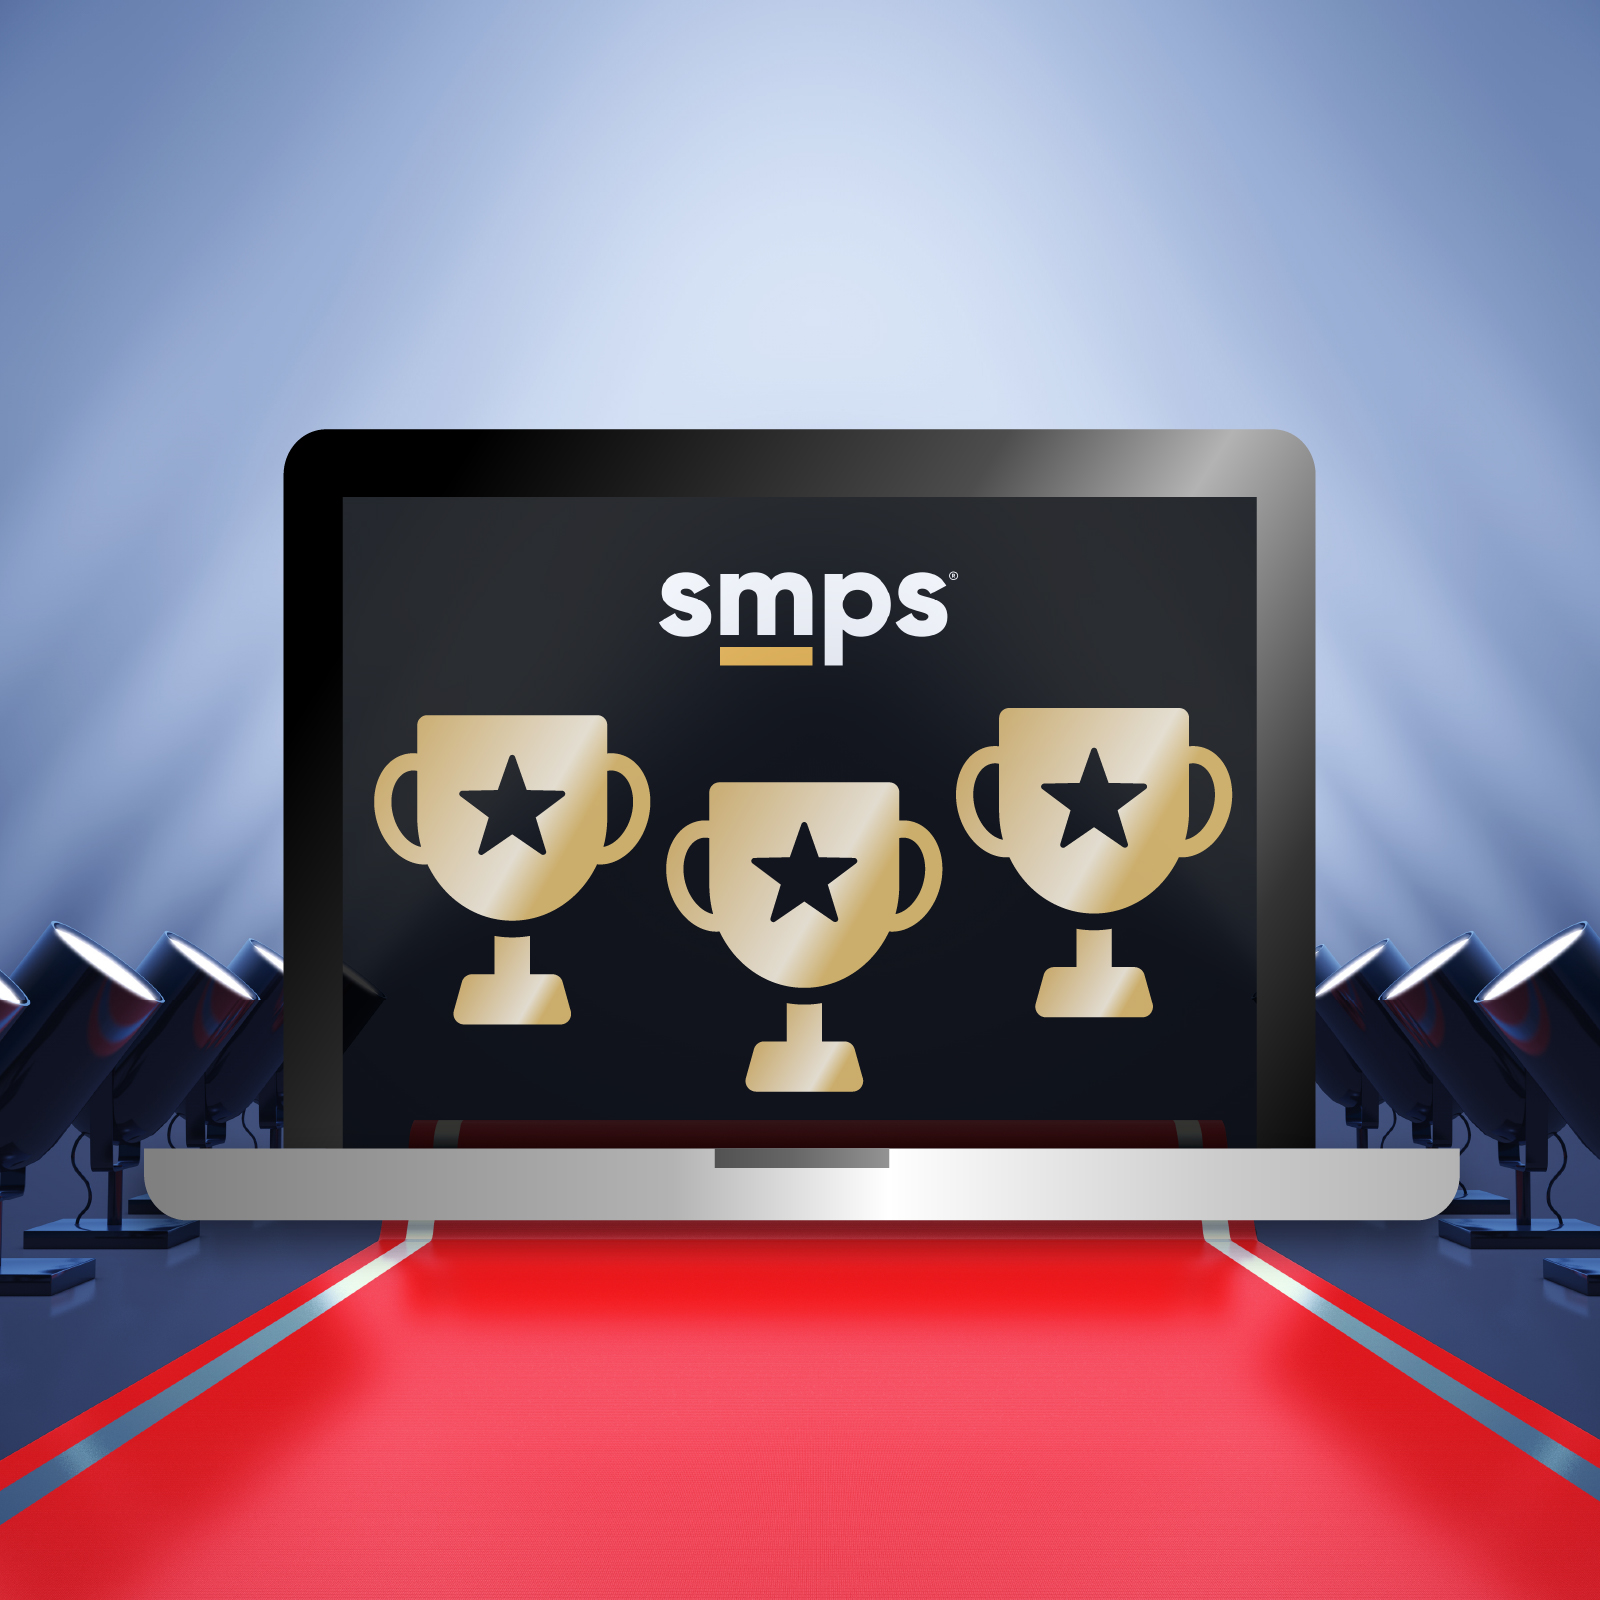 Red carpet graphic with SMPS logo